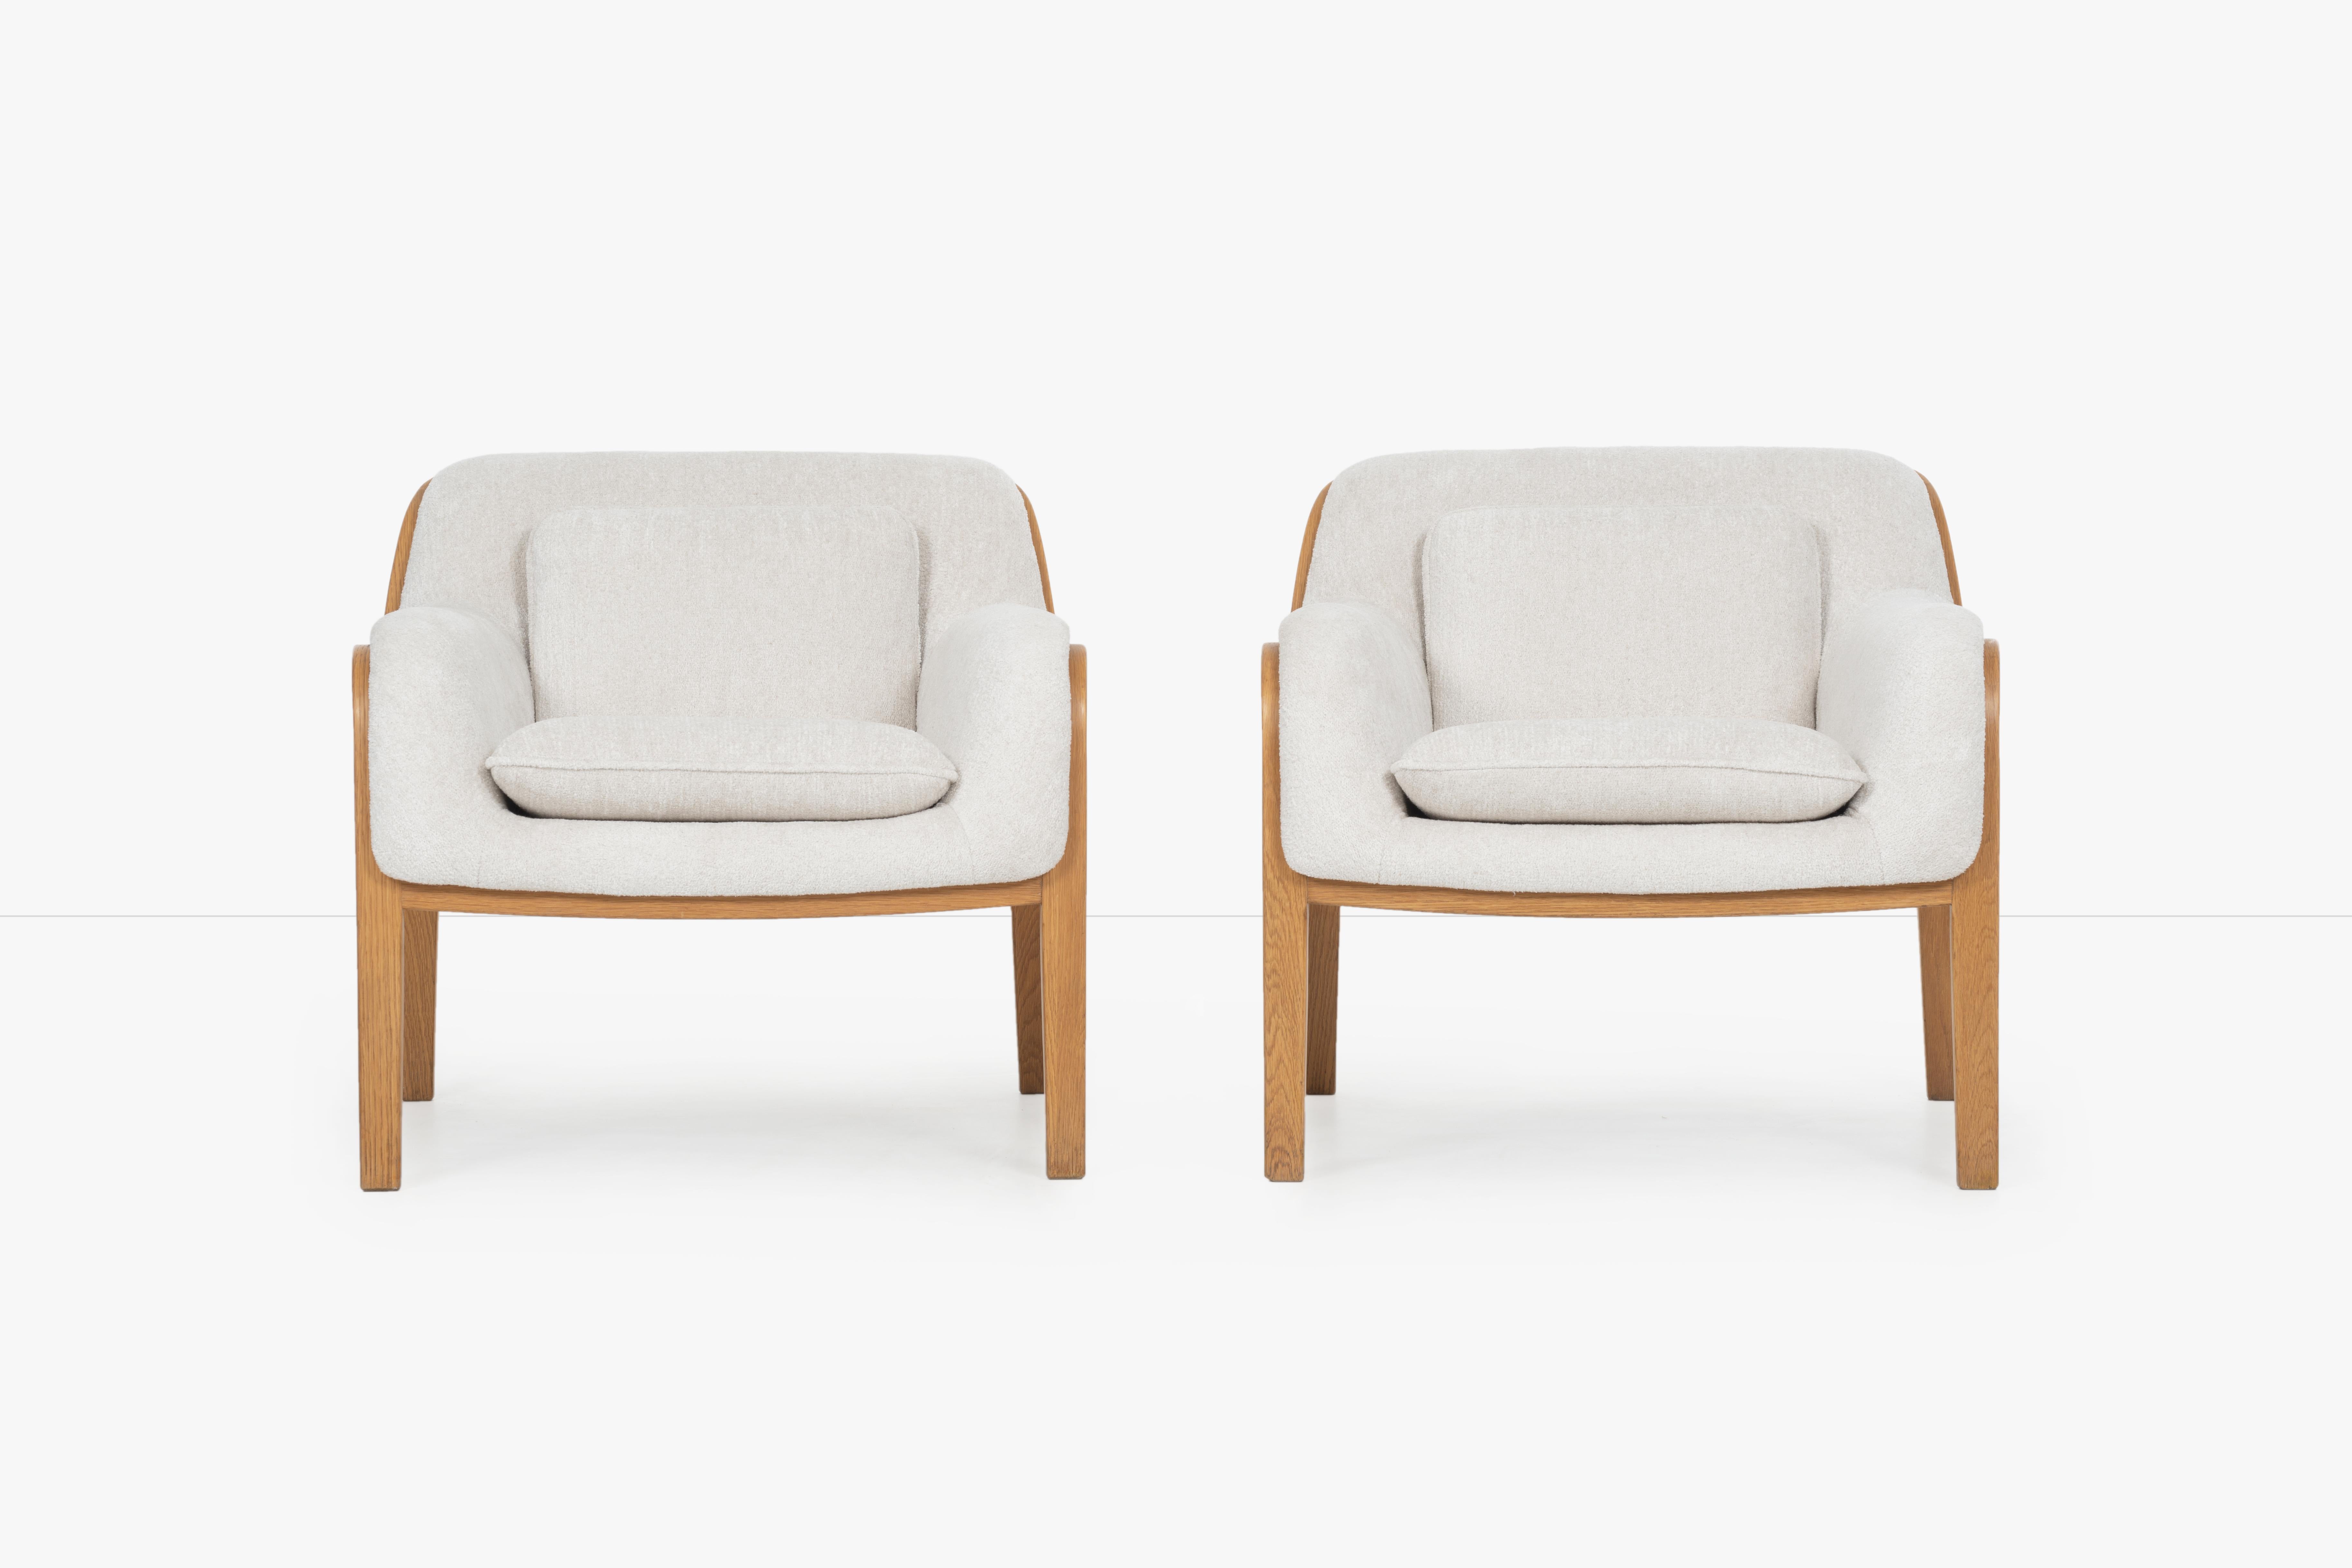 Bill Stephens Knoll vintage 1315 lounge chairs. Inspired by Eero Saarinen womb chair.
Layered bentwood frames re-upholstered with great plains fabric with heavy weave.

        